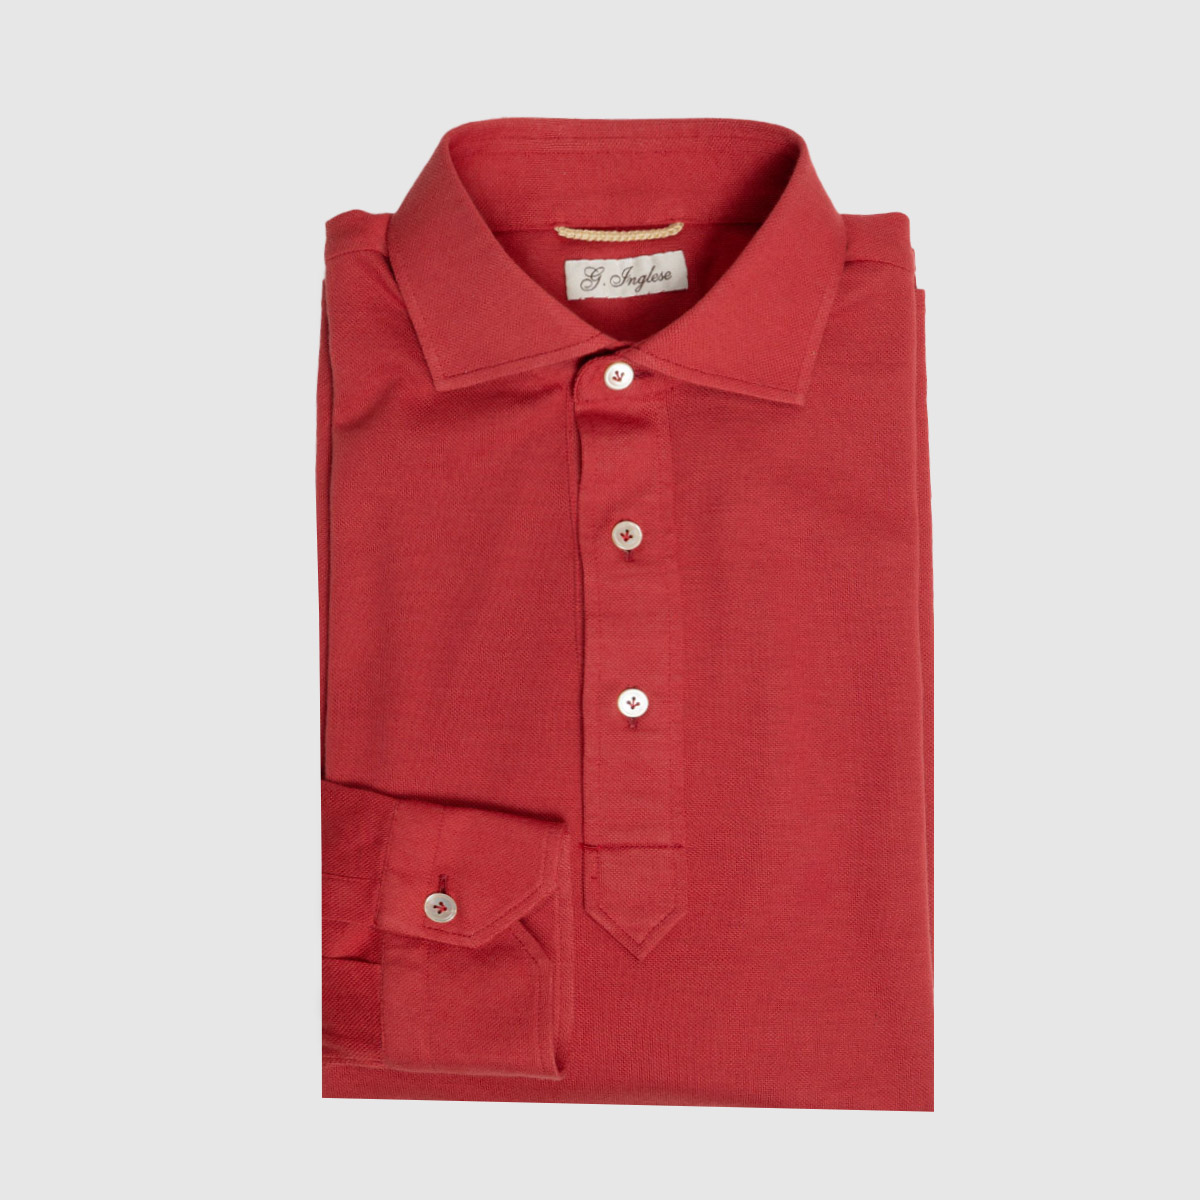 Piquet Cotton Polo Shirt in Red G. Inglese on sale 2022